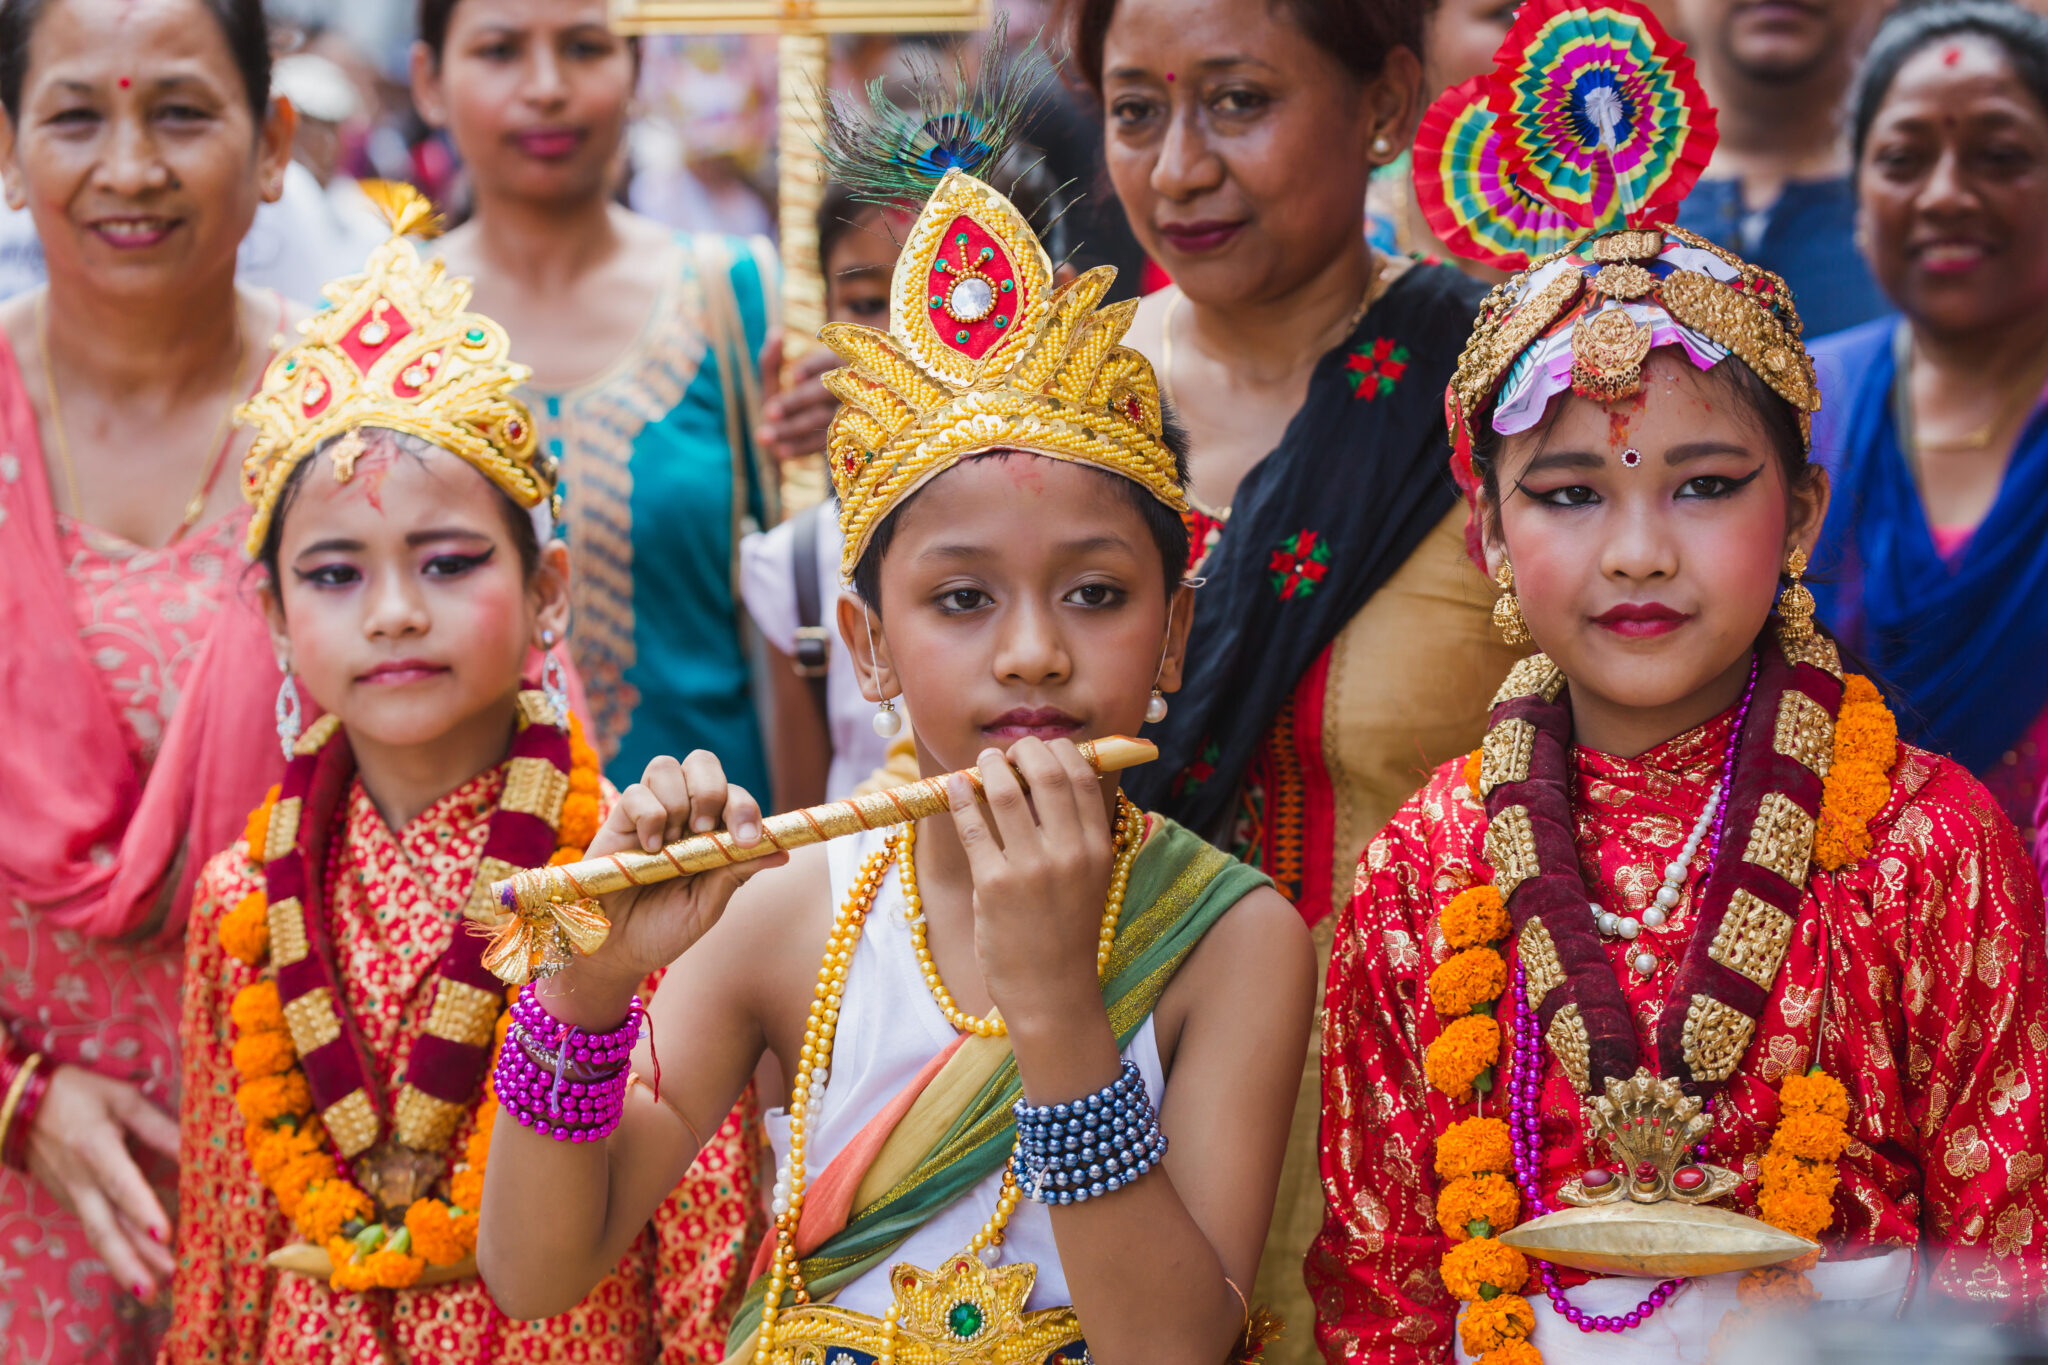 Child wearing golden headdress plays flute while flanked by two children in colorful garments and headdresses